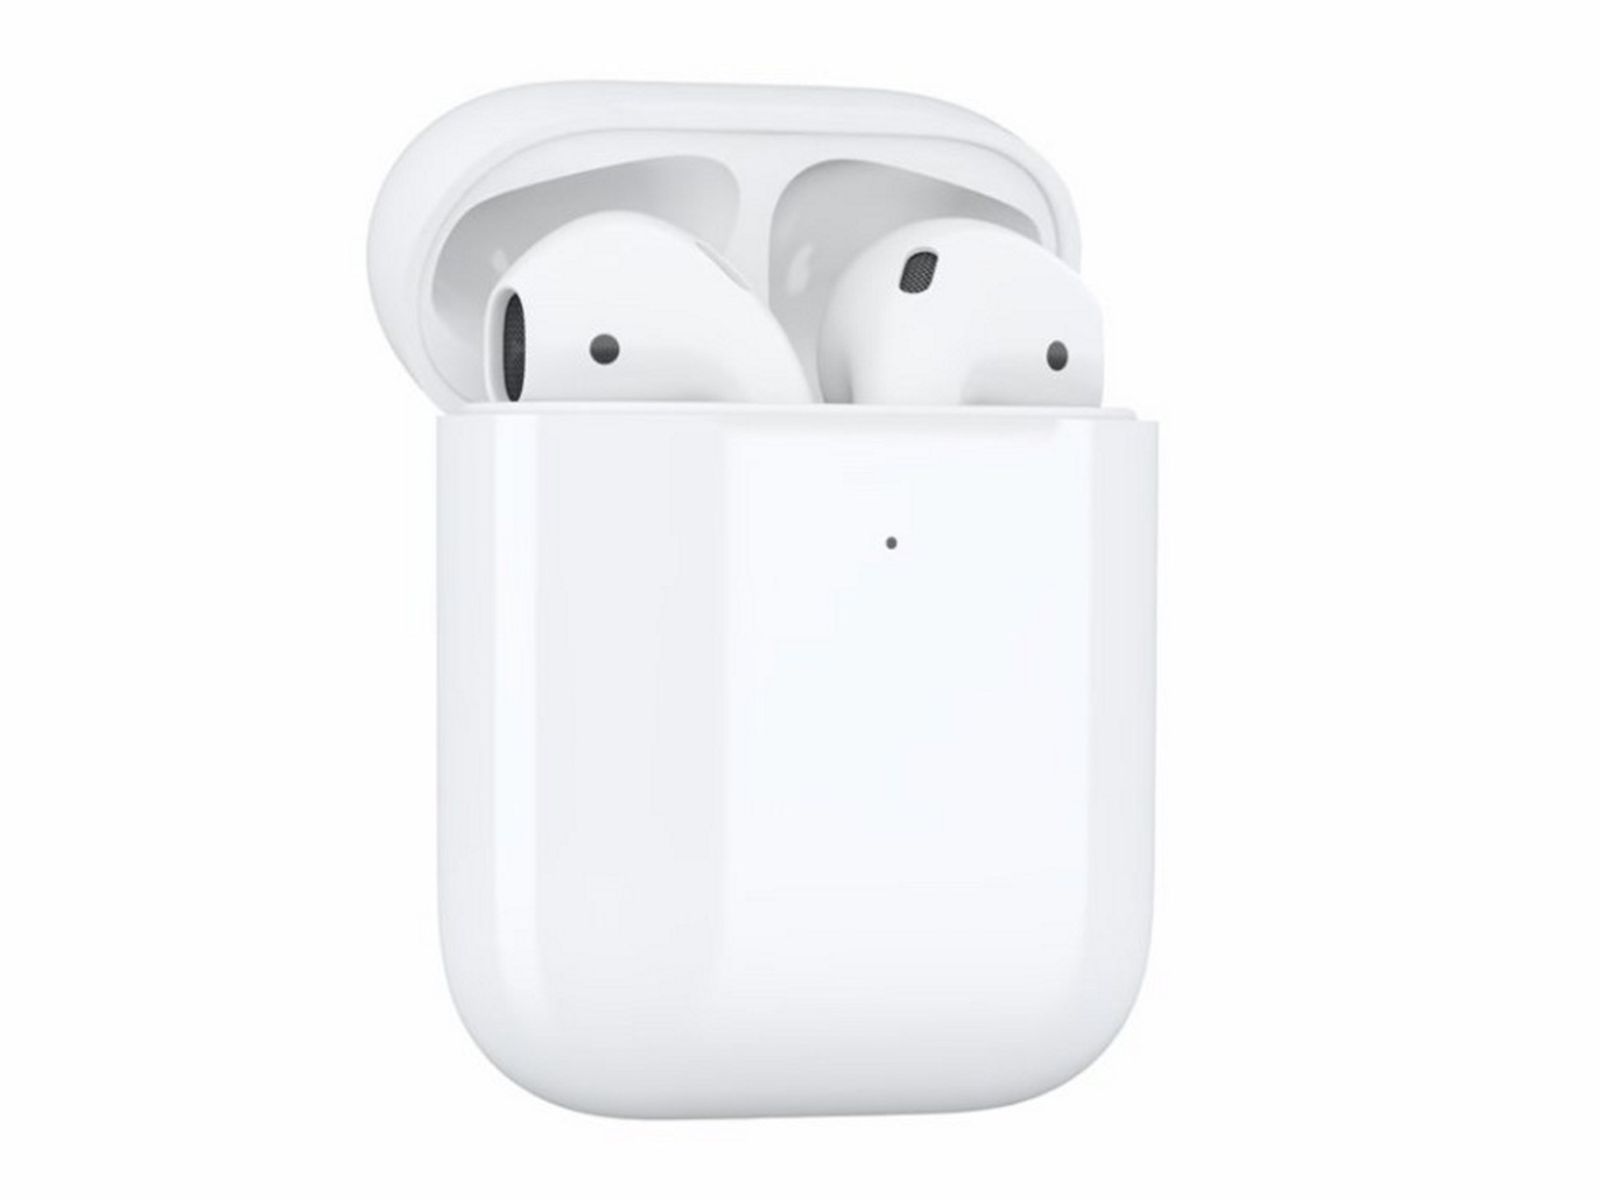 Wireless Airpods Charging Case Expected Soon But Airpods 2 May Not Launch Until Fall Macrumors